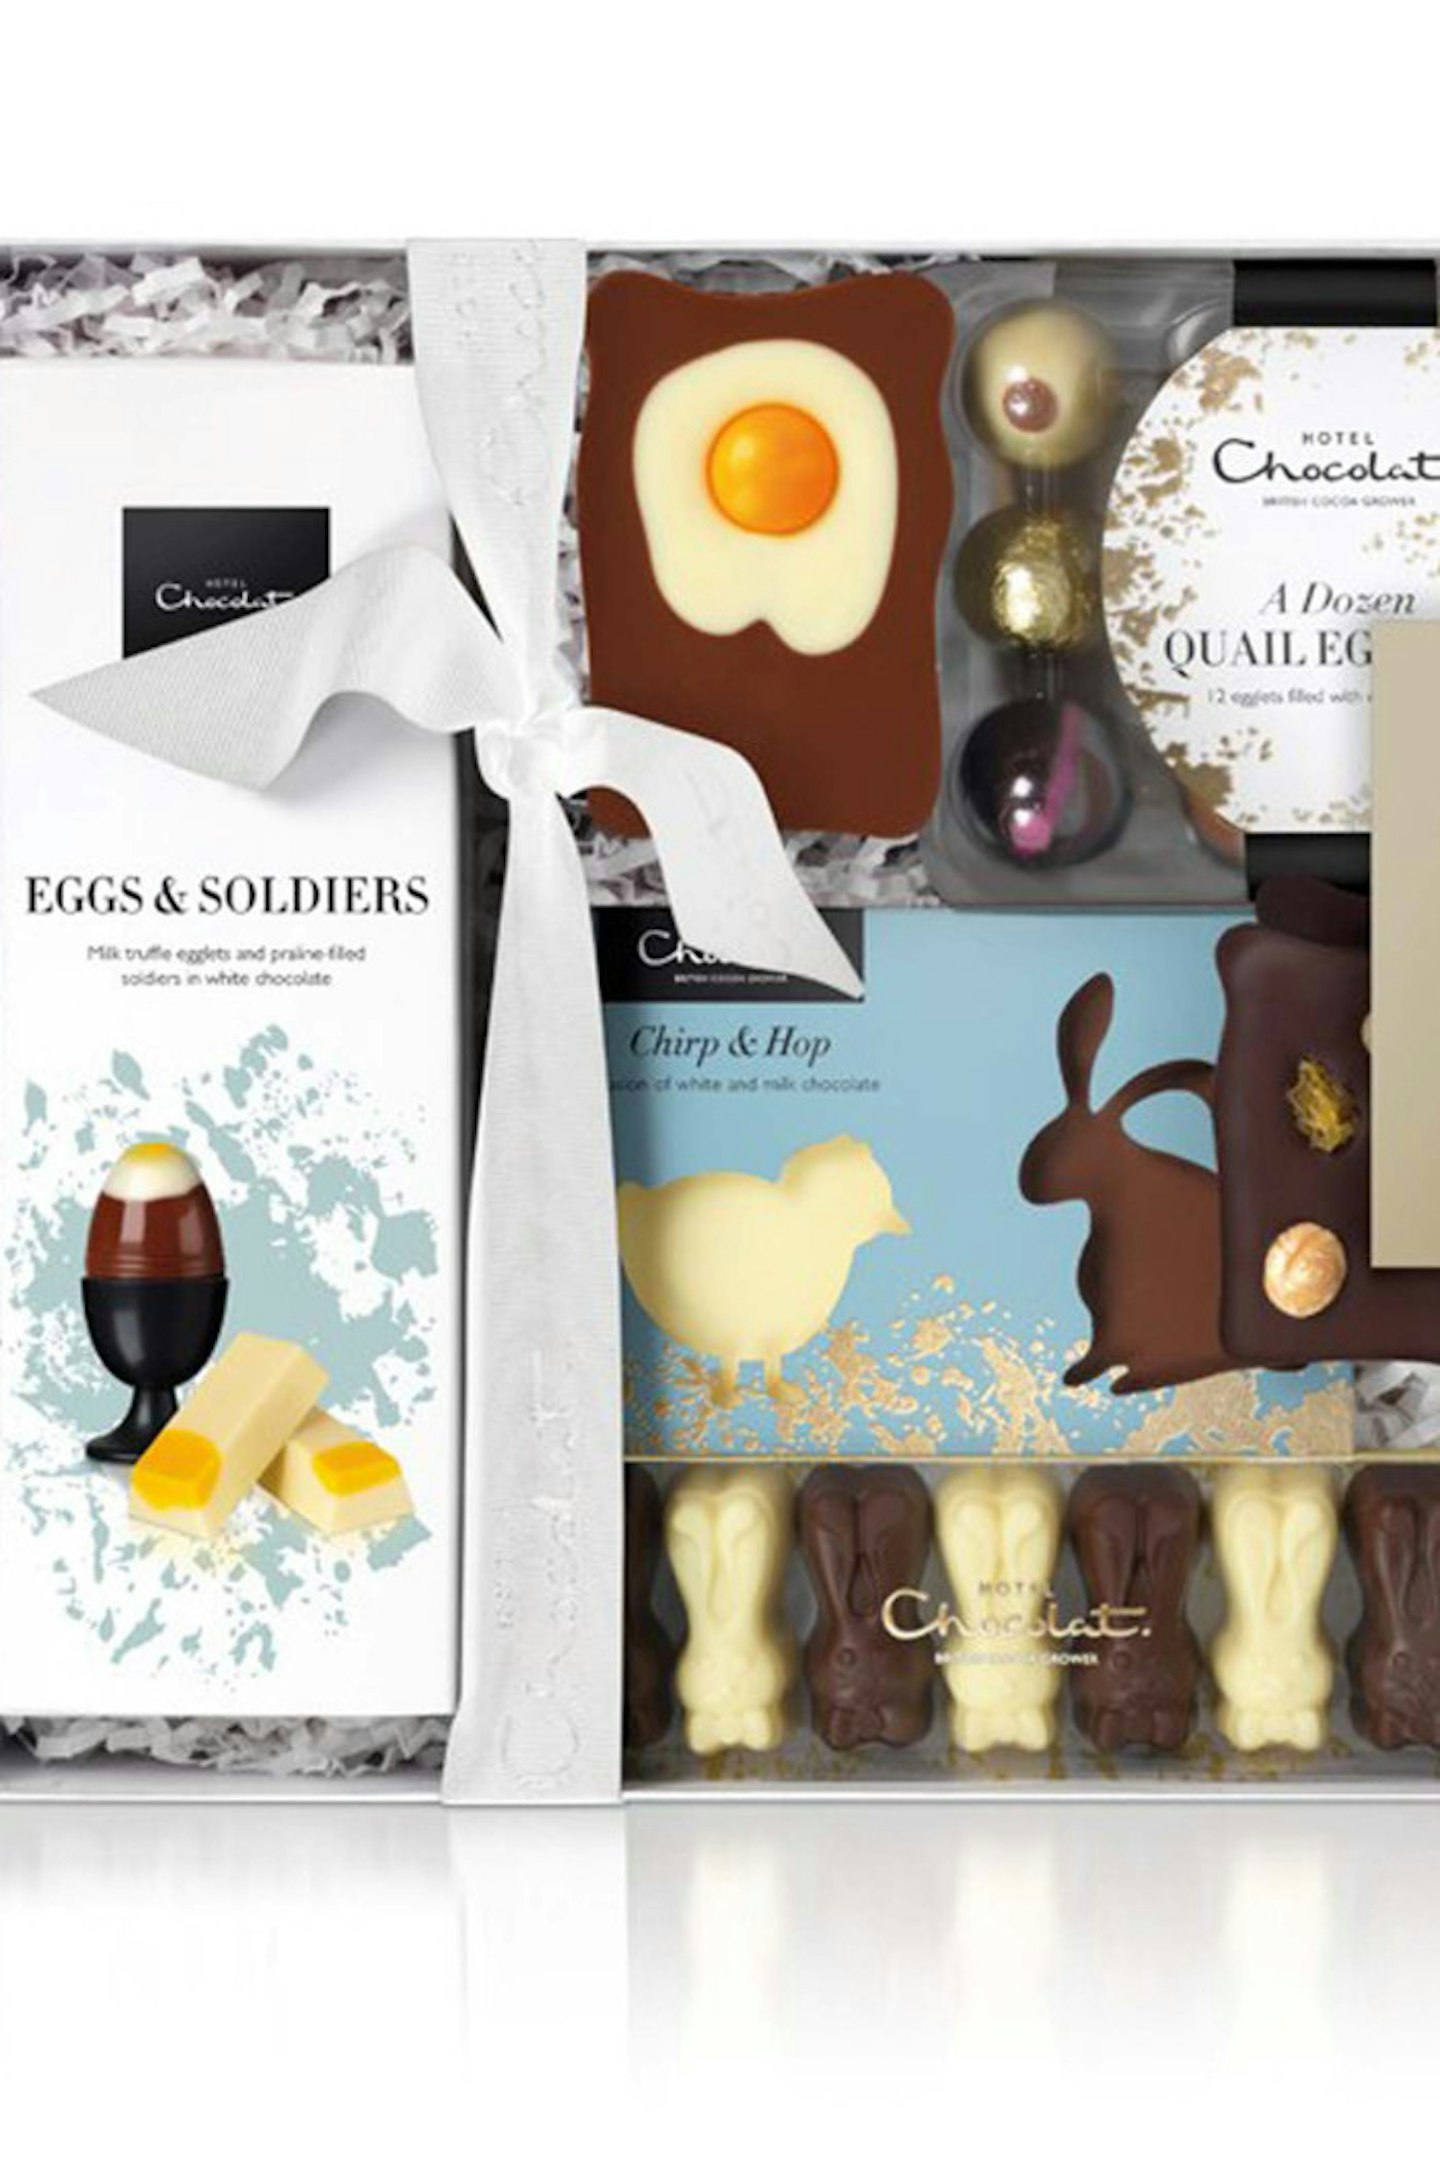 The Easter Collection hotel choc 35.00